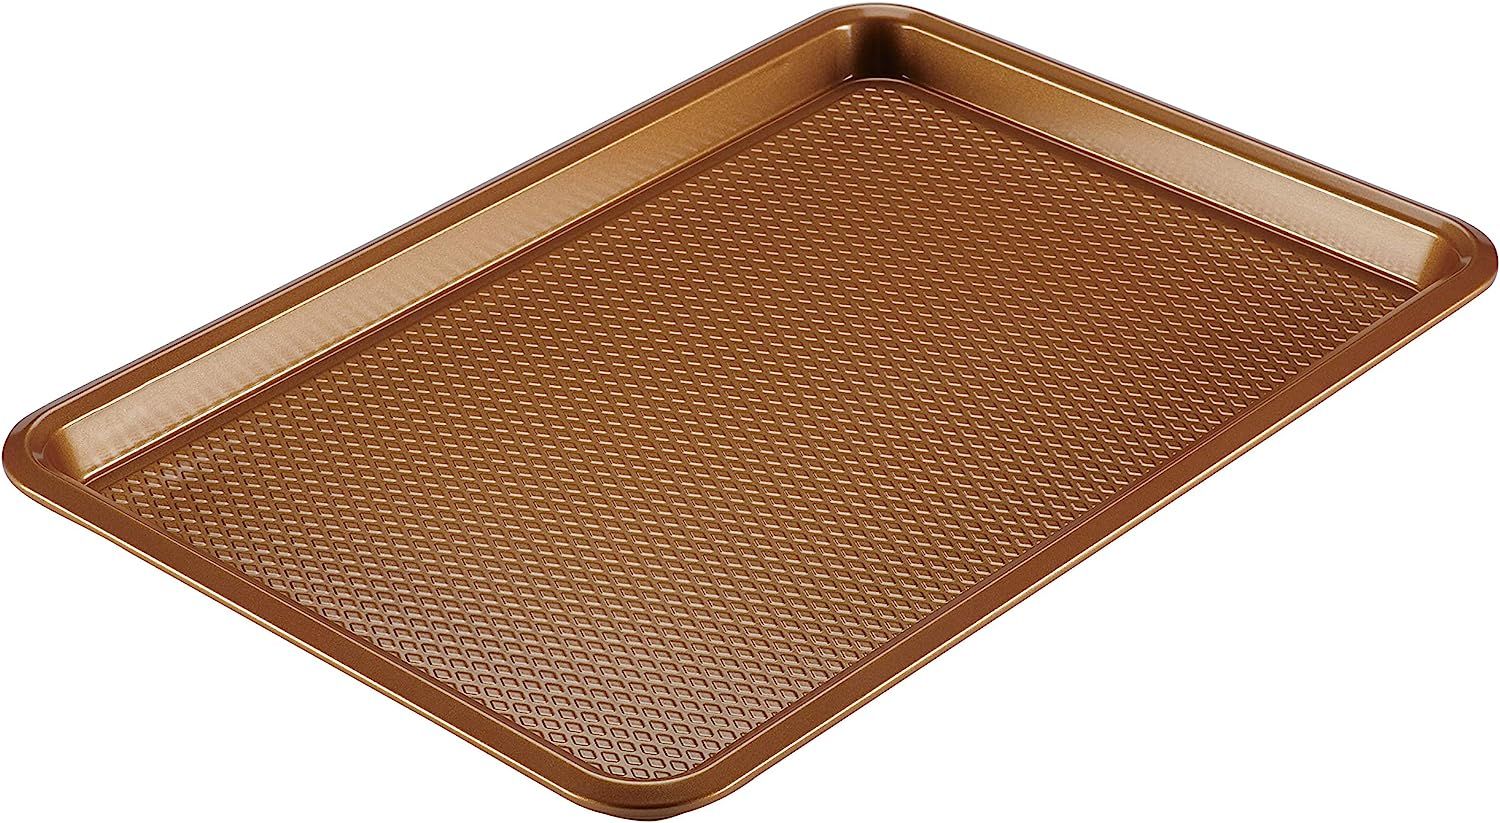 Ayesha Curry Nonstick Bakeware, Nonstick Cookie Sheet / Baking Sheet - 11 Inch x 17 Inch, Copper ... | Amazon (US)